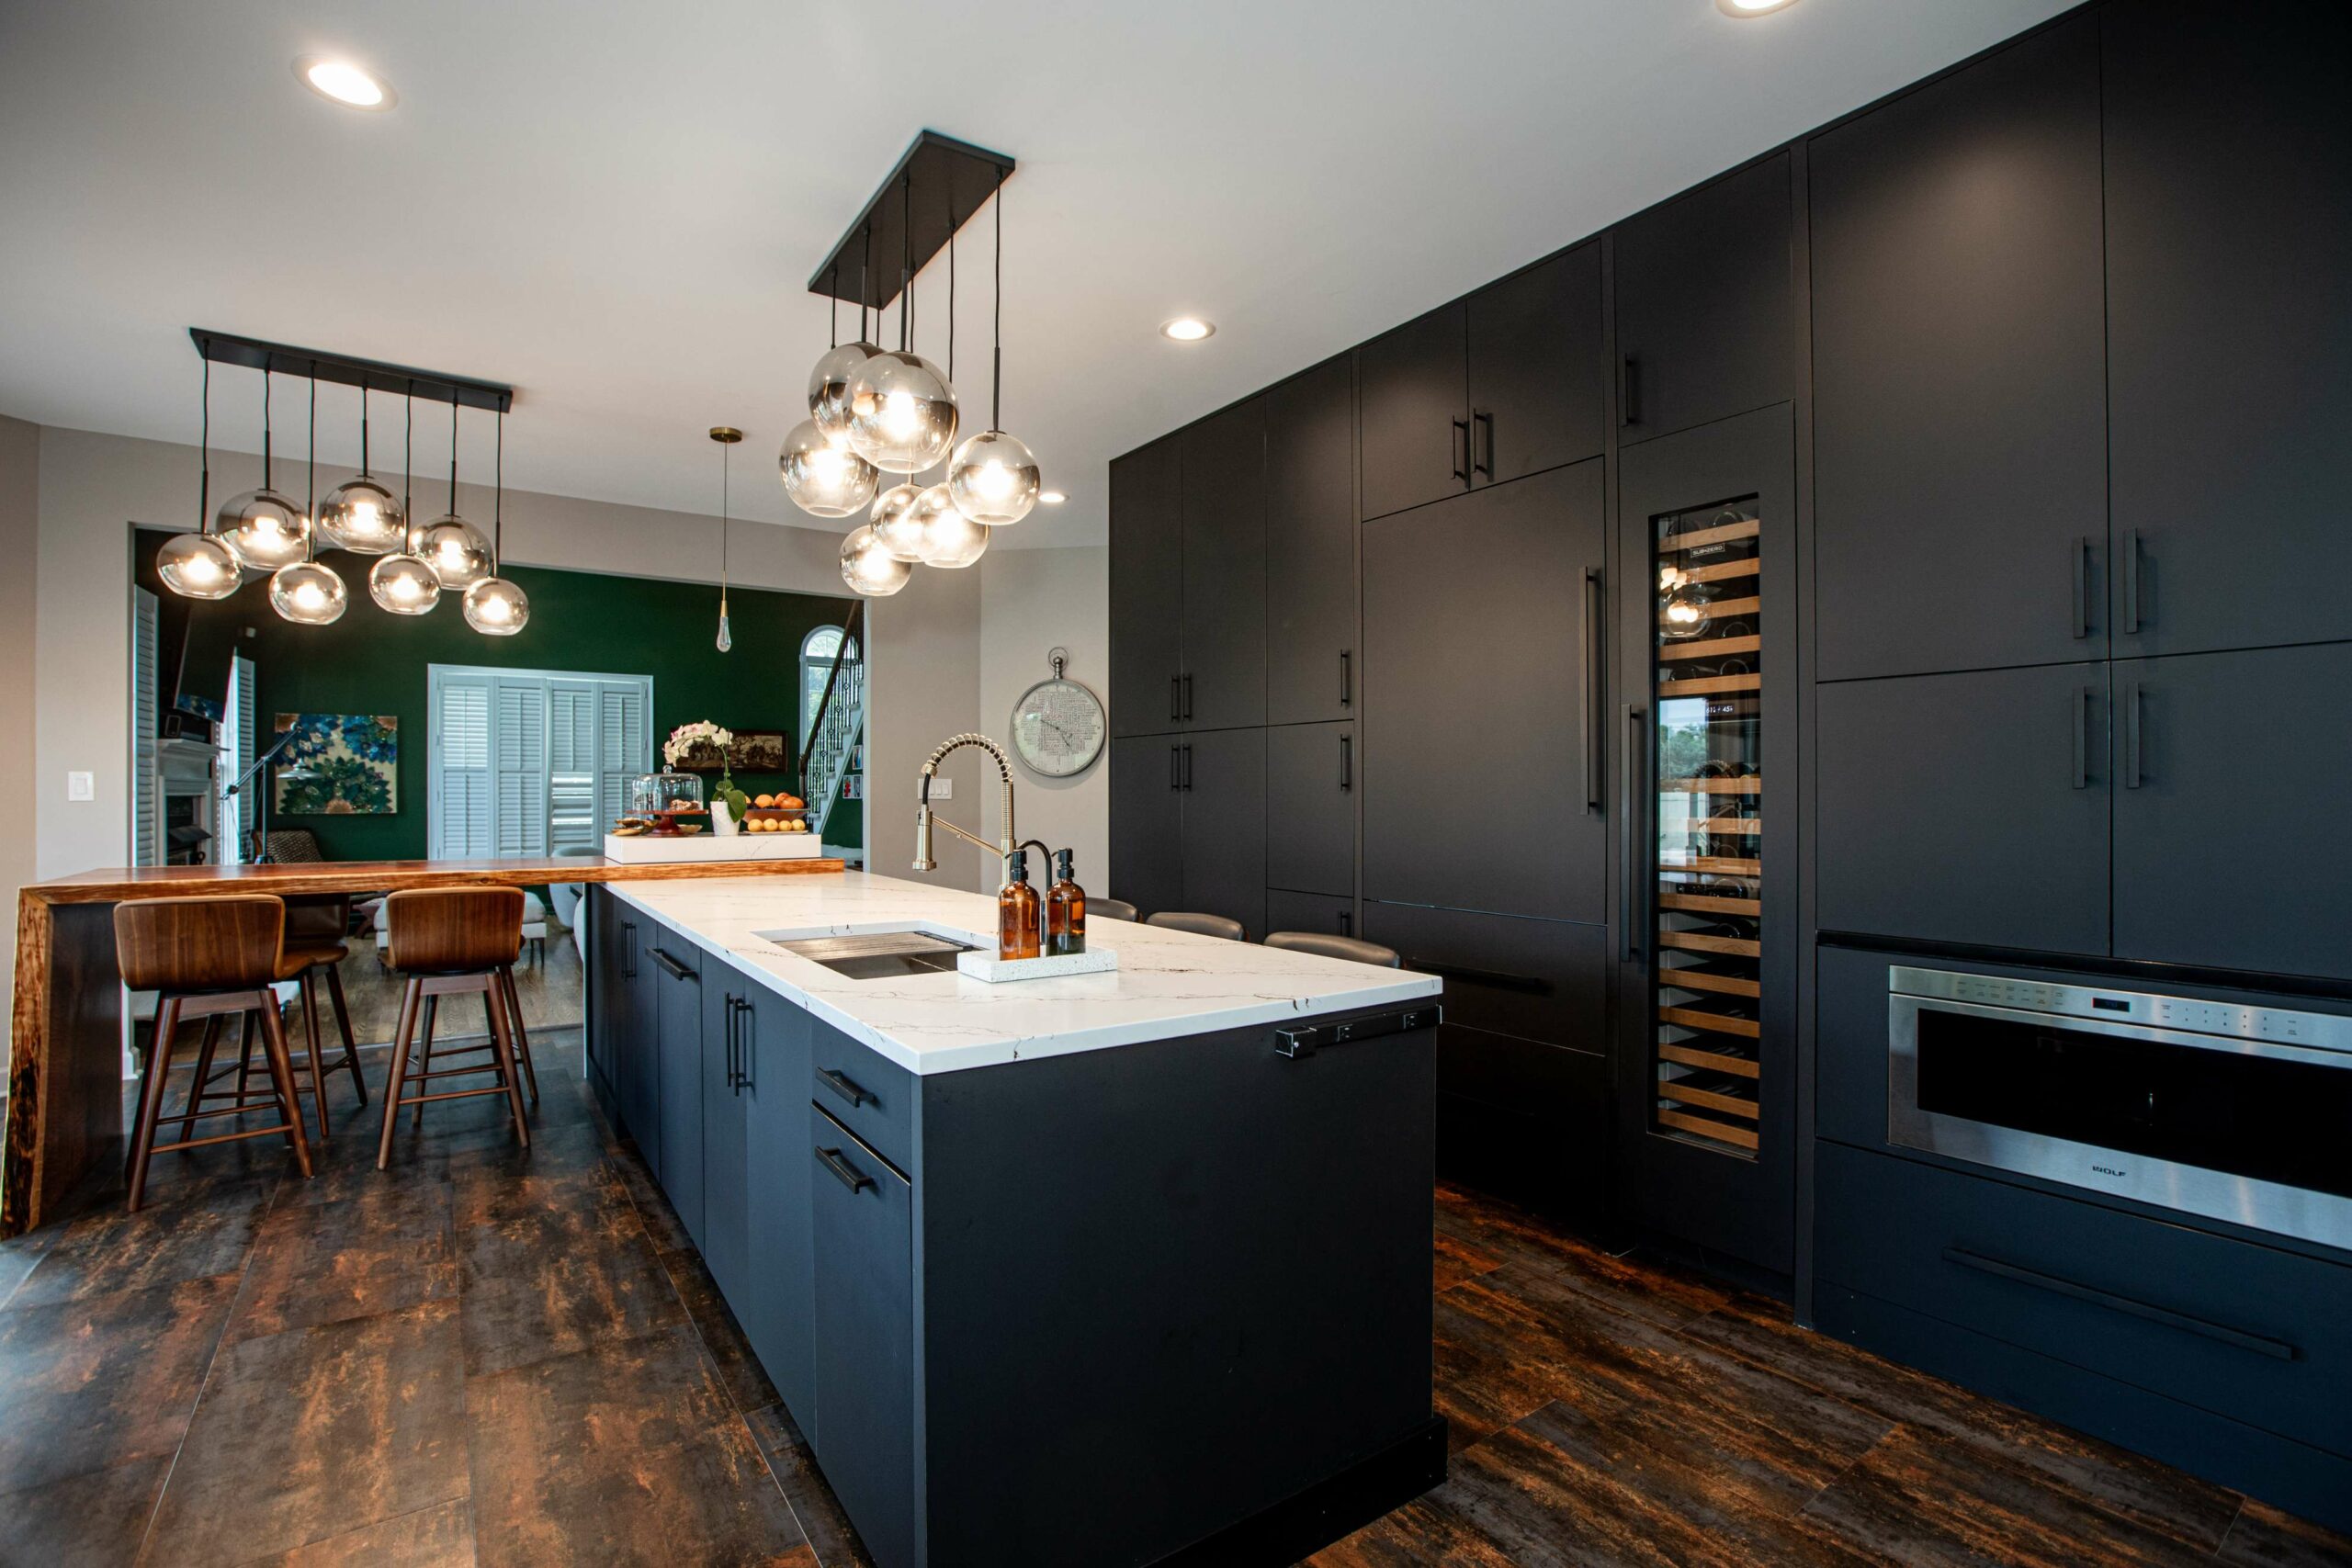 Modern and Multigenerational: A Total Home Refresh to Make Room for the Whole Family